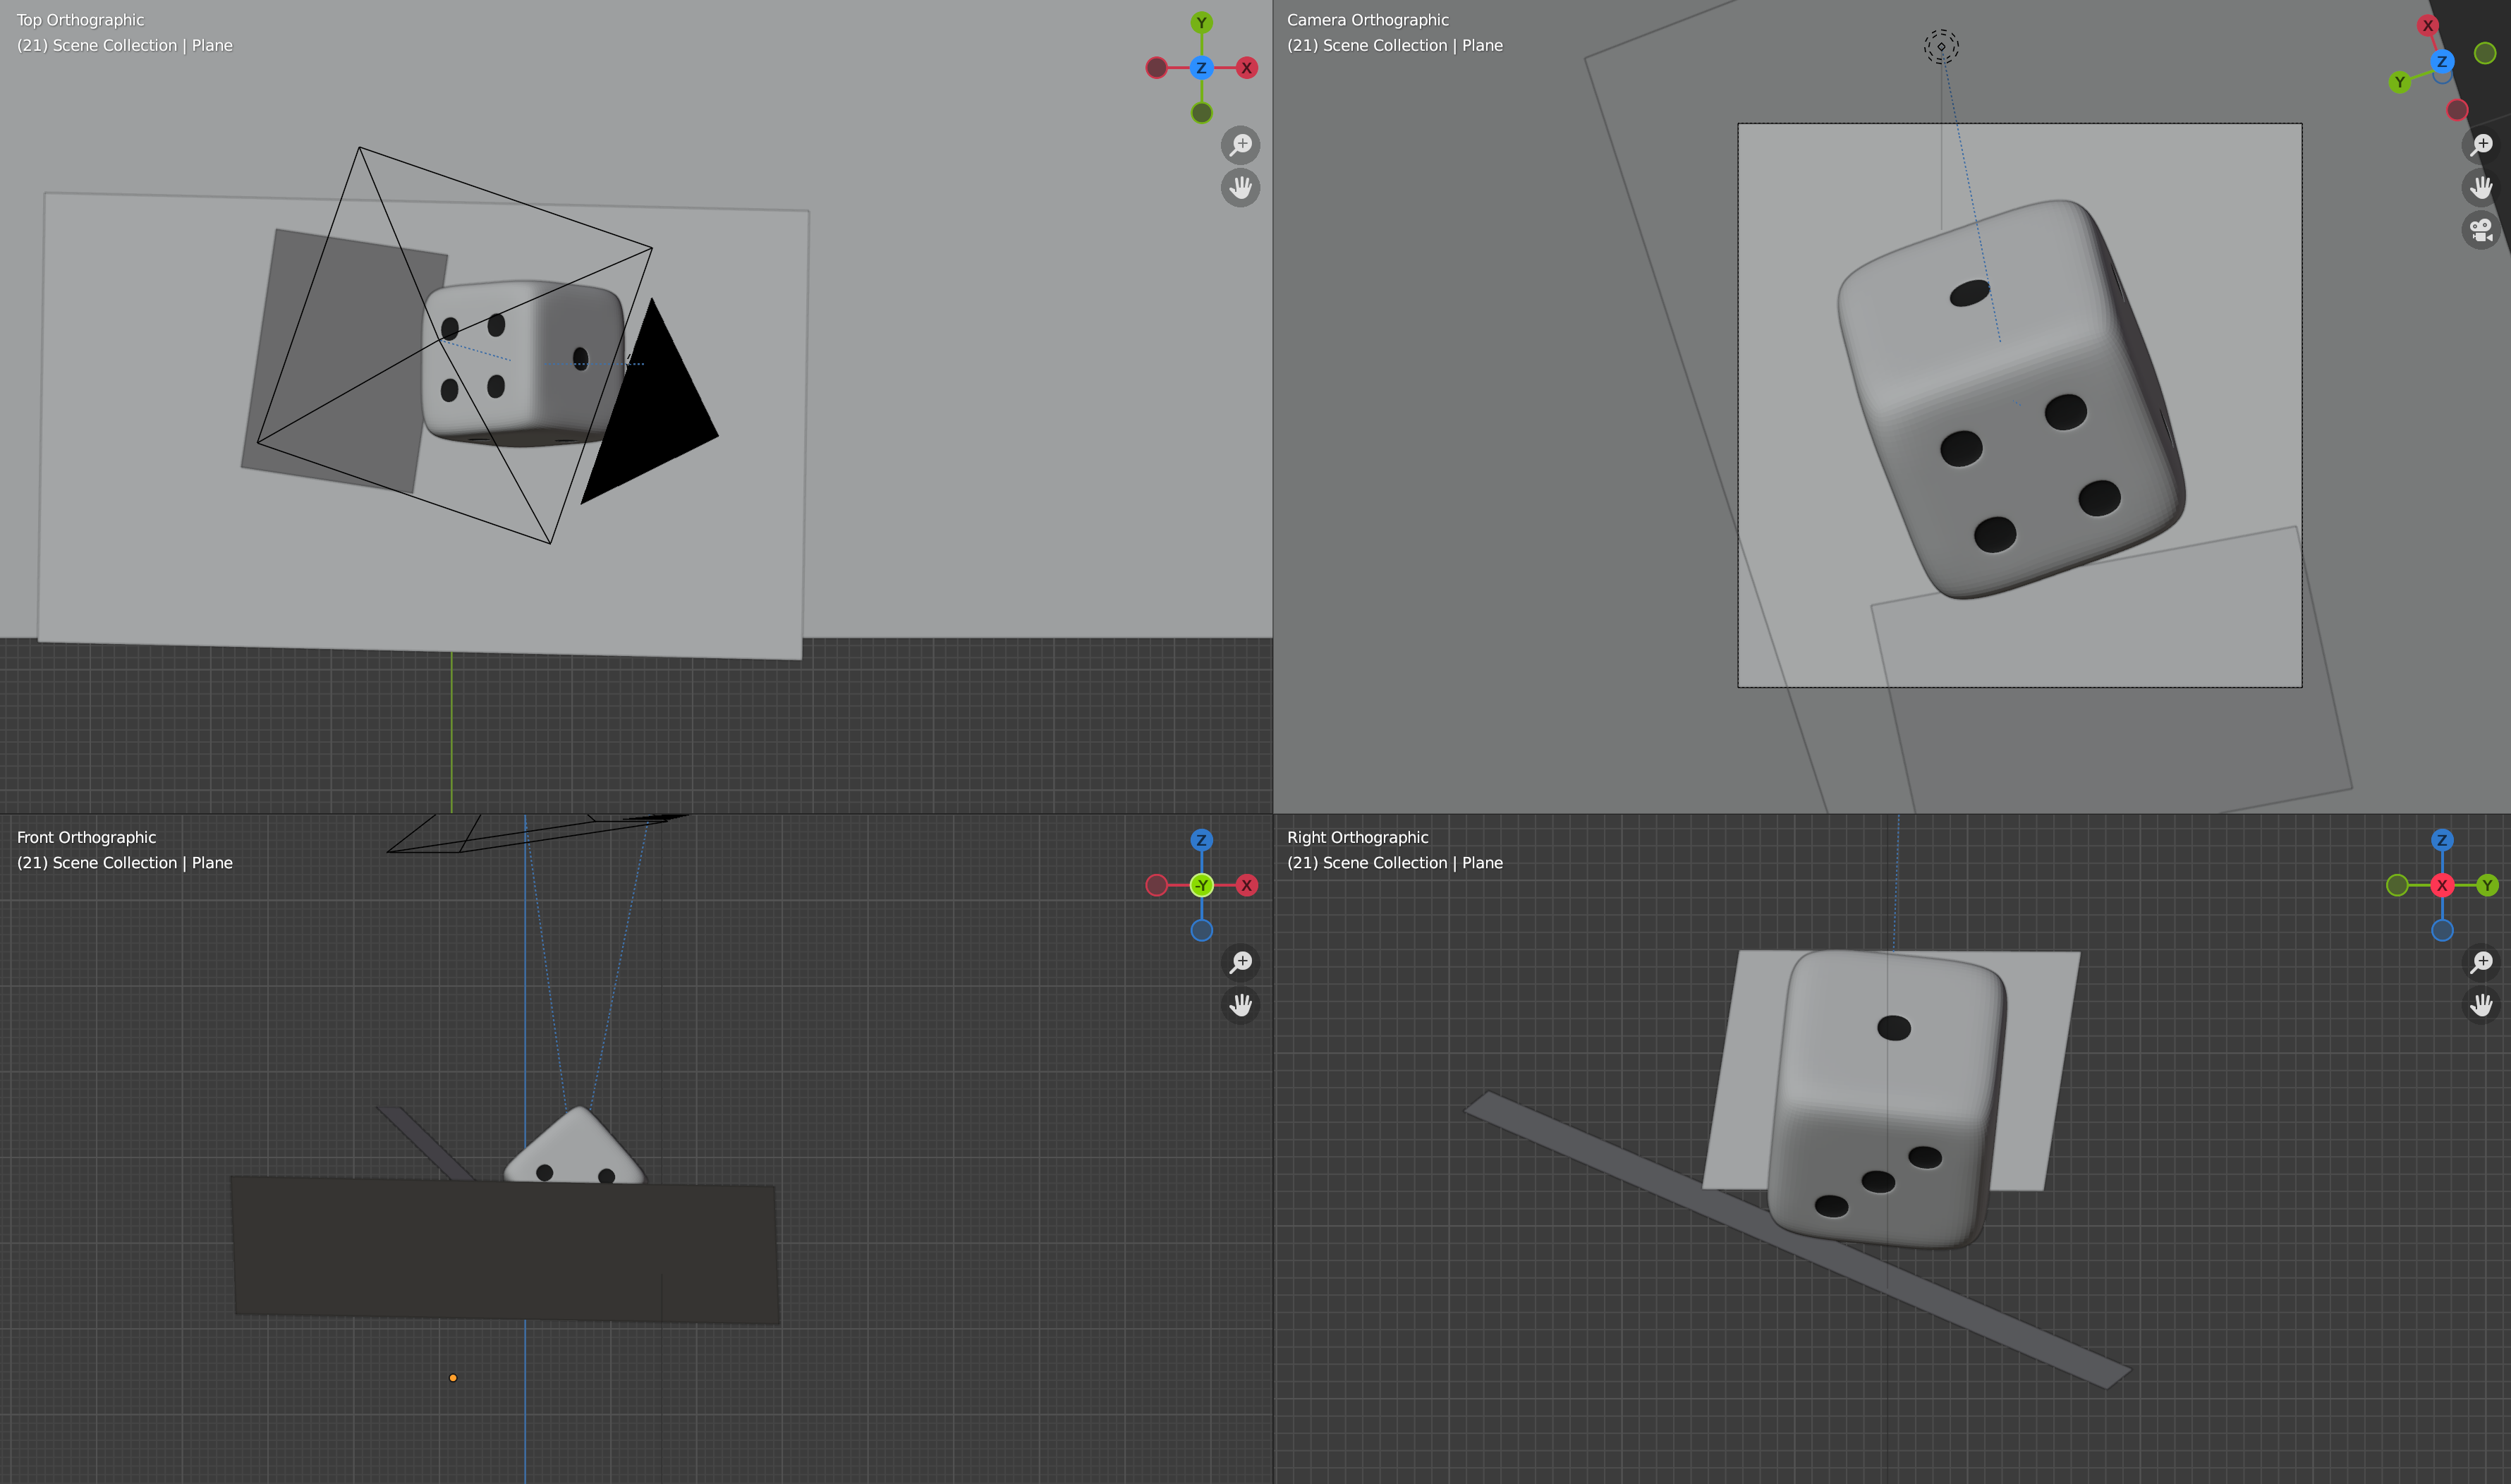 Screenshot of a 3D authoring program, showing quad view of a die mid-roll from different angles